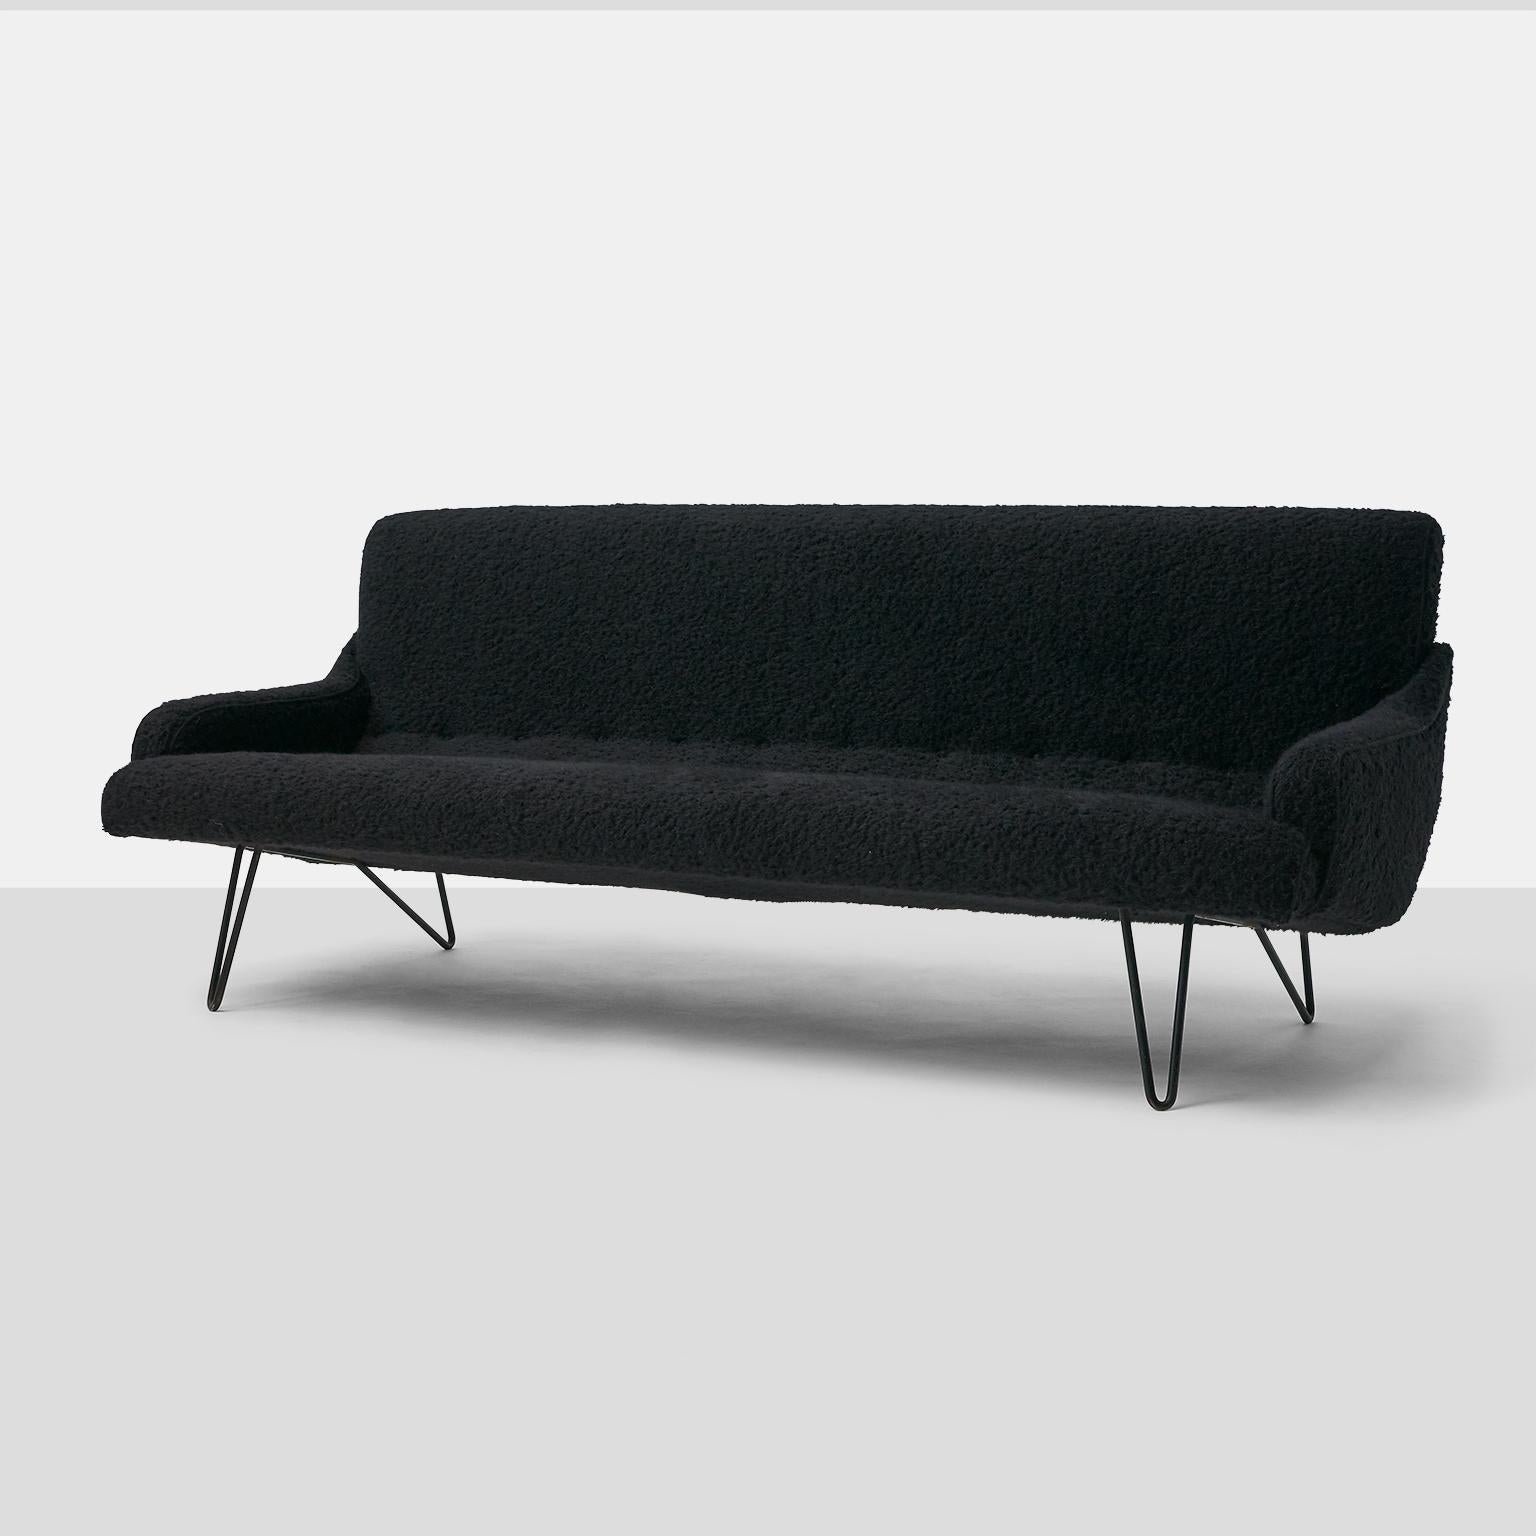 Rare Sofa by Greta Grossman for The Sherman Bertram Company.
USA, 1952

A rare and collectible sofa designed by Greta Grossman. This sofa appeared in the May 1952 edition of the Arts & Architecture magazine.
The metal frame is in original